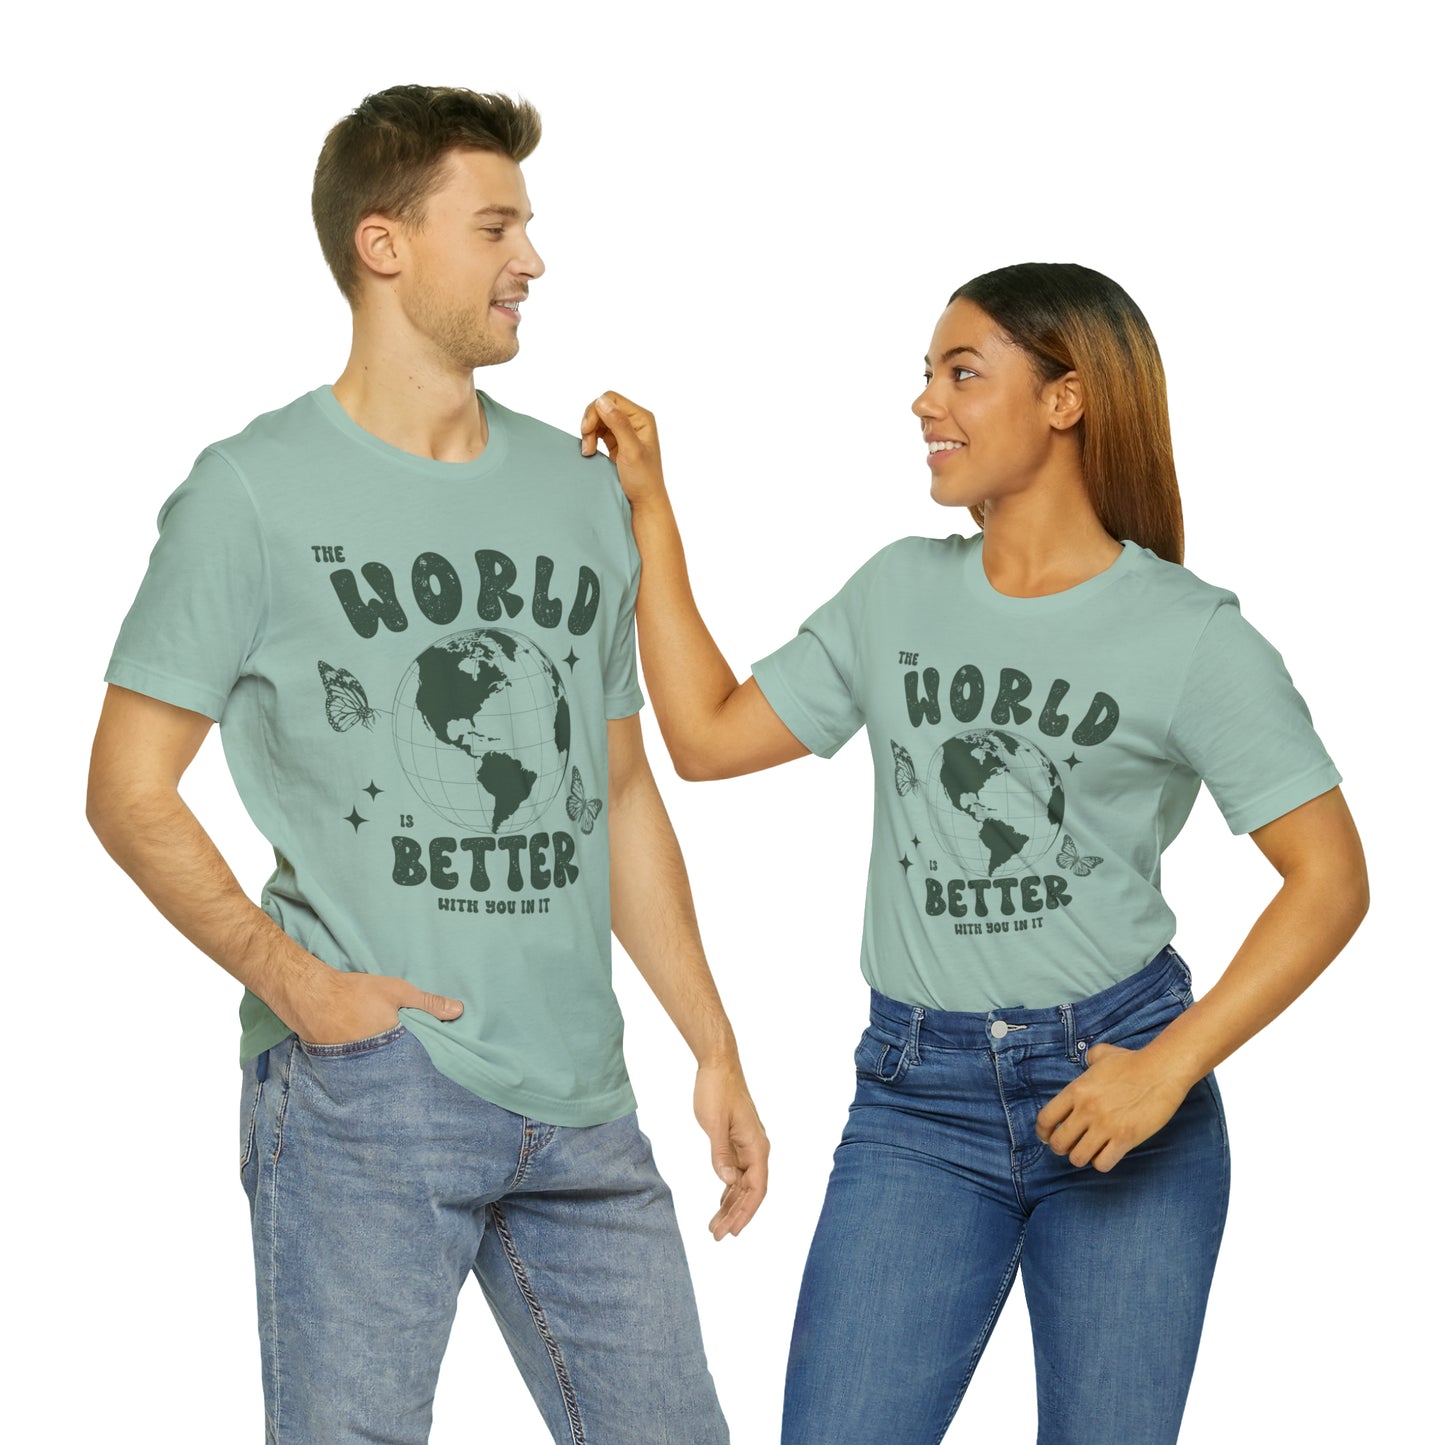 "The World is Better With You In It" Bella Canvas Unisex Short Sleeve Tee